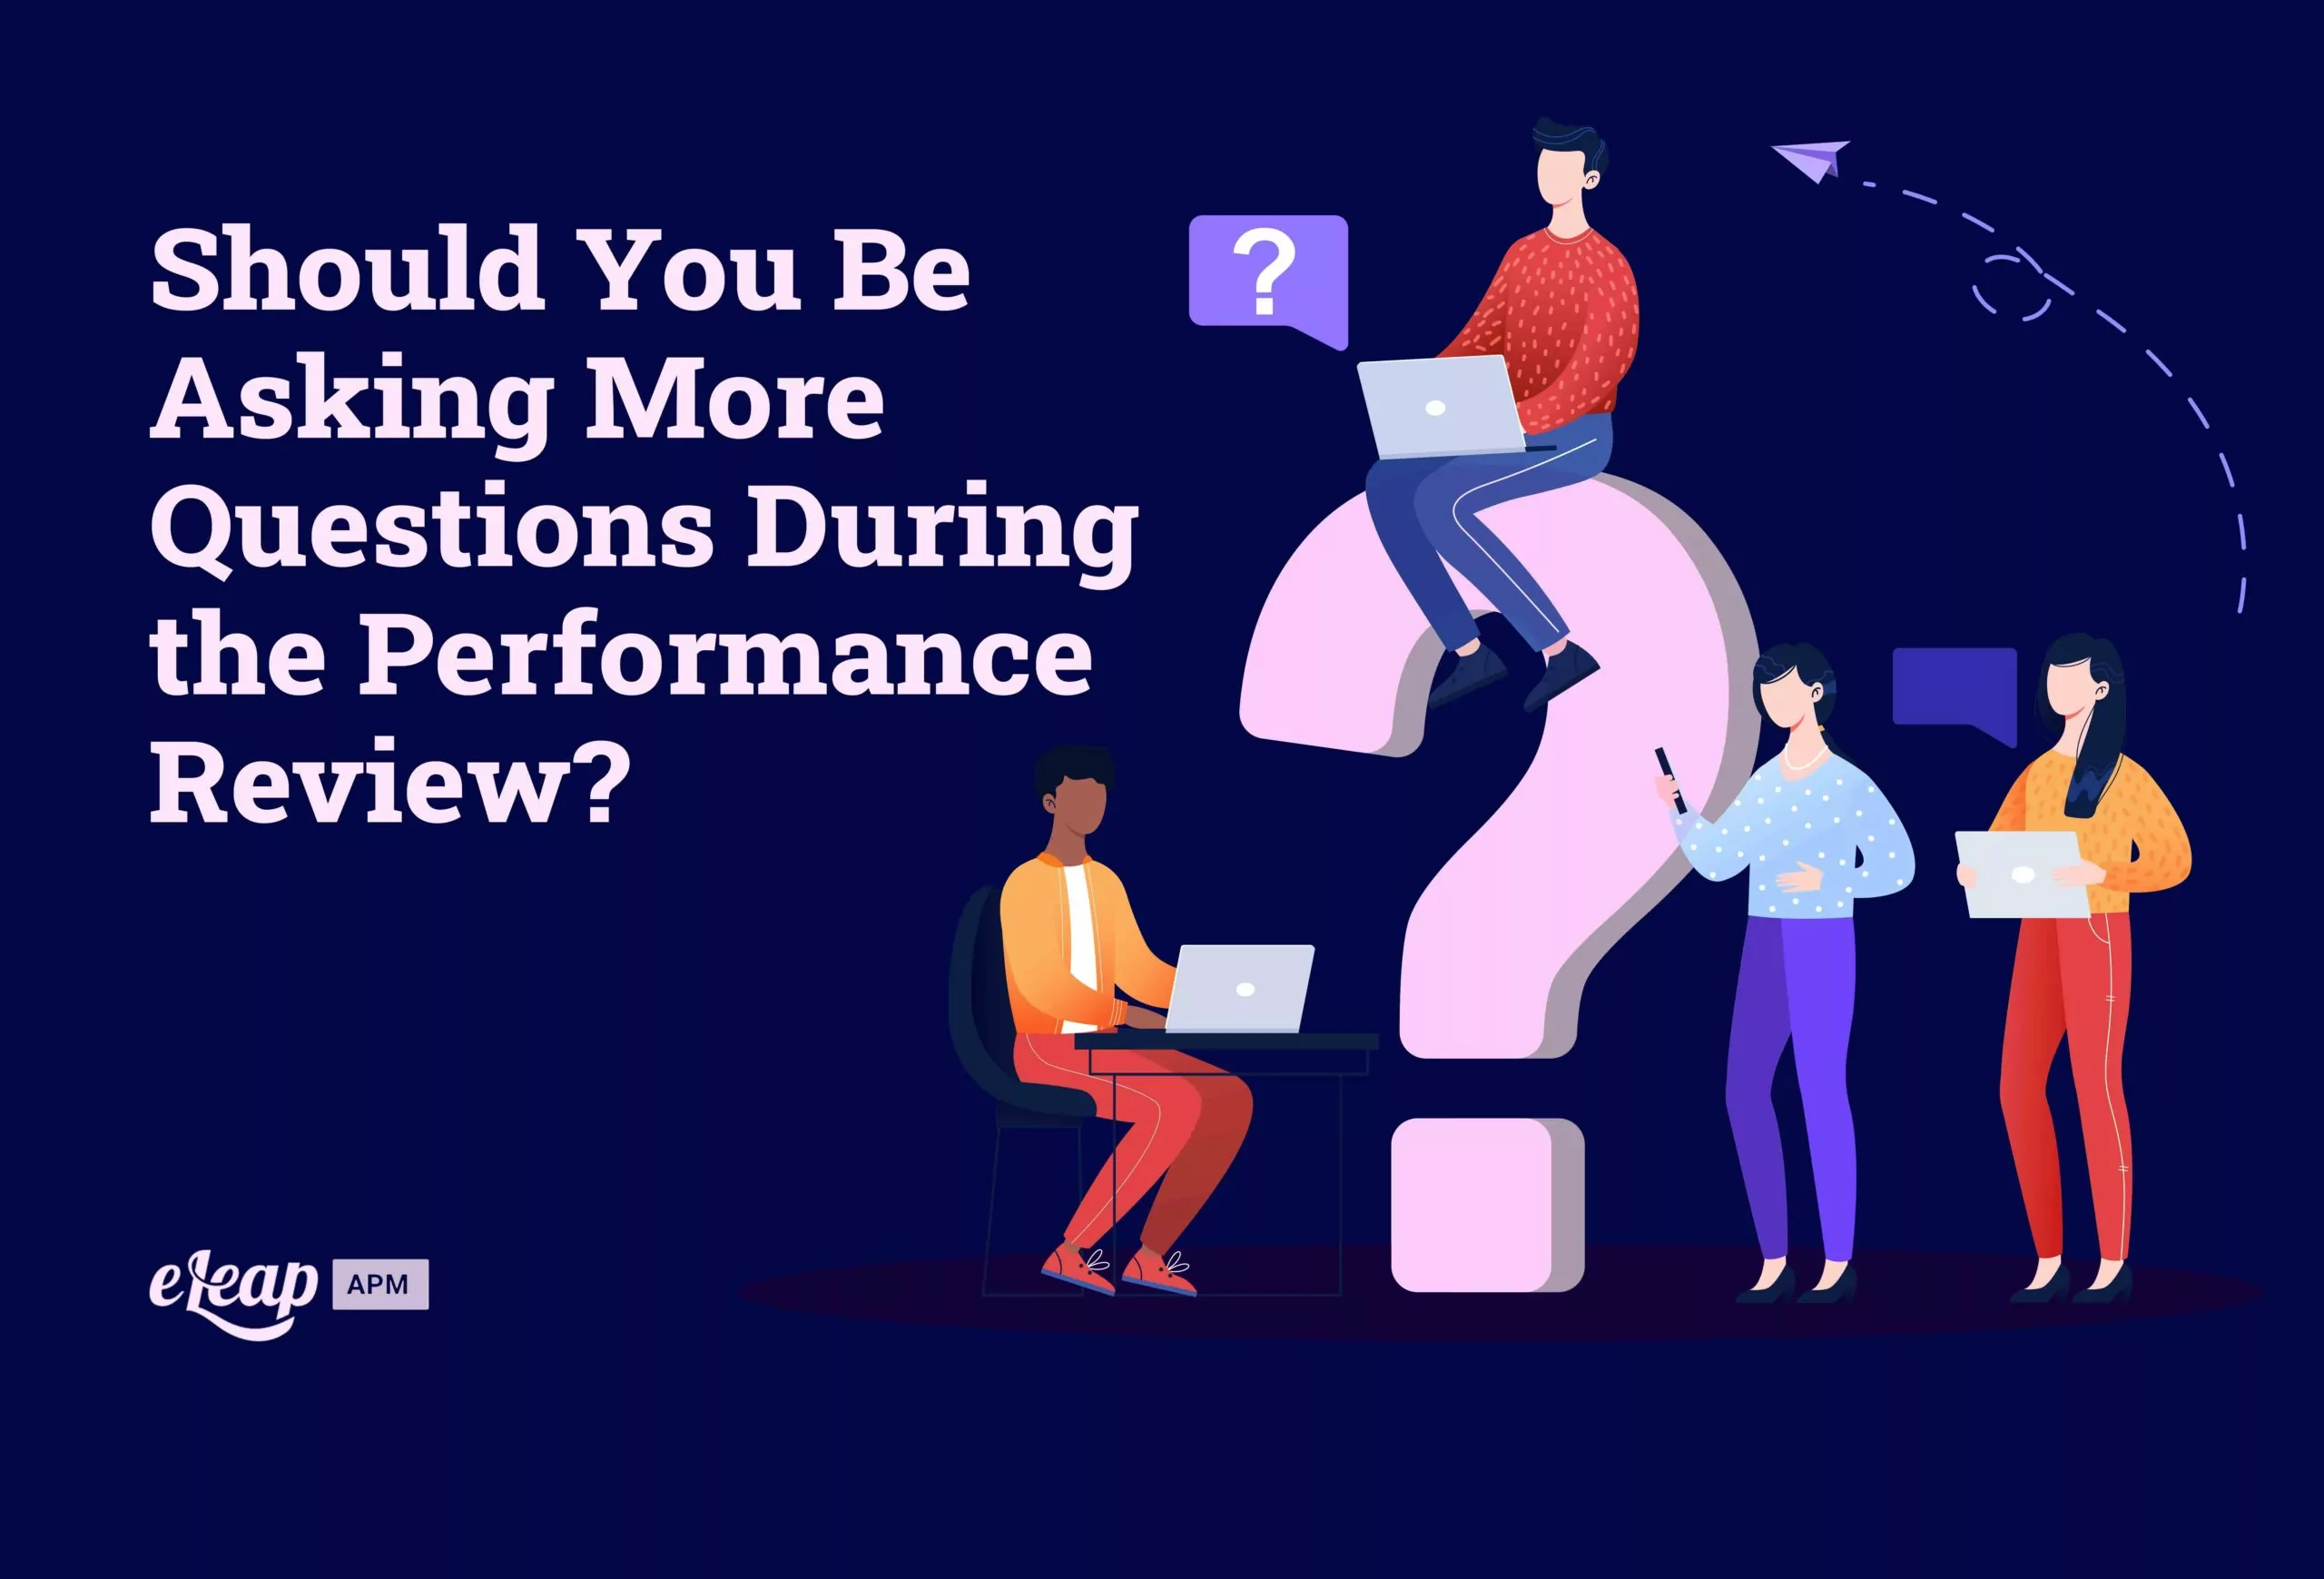 Should You Be Asking More Questions During the Performance Review?